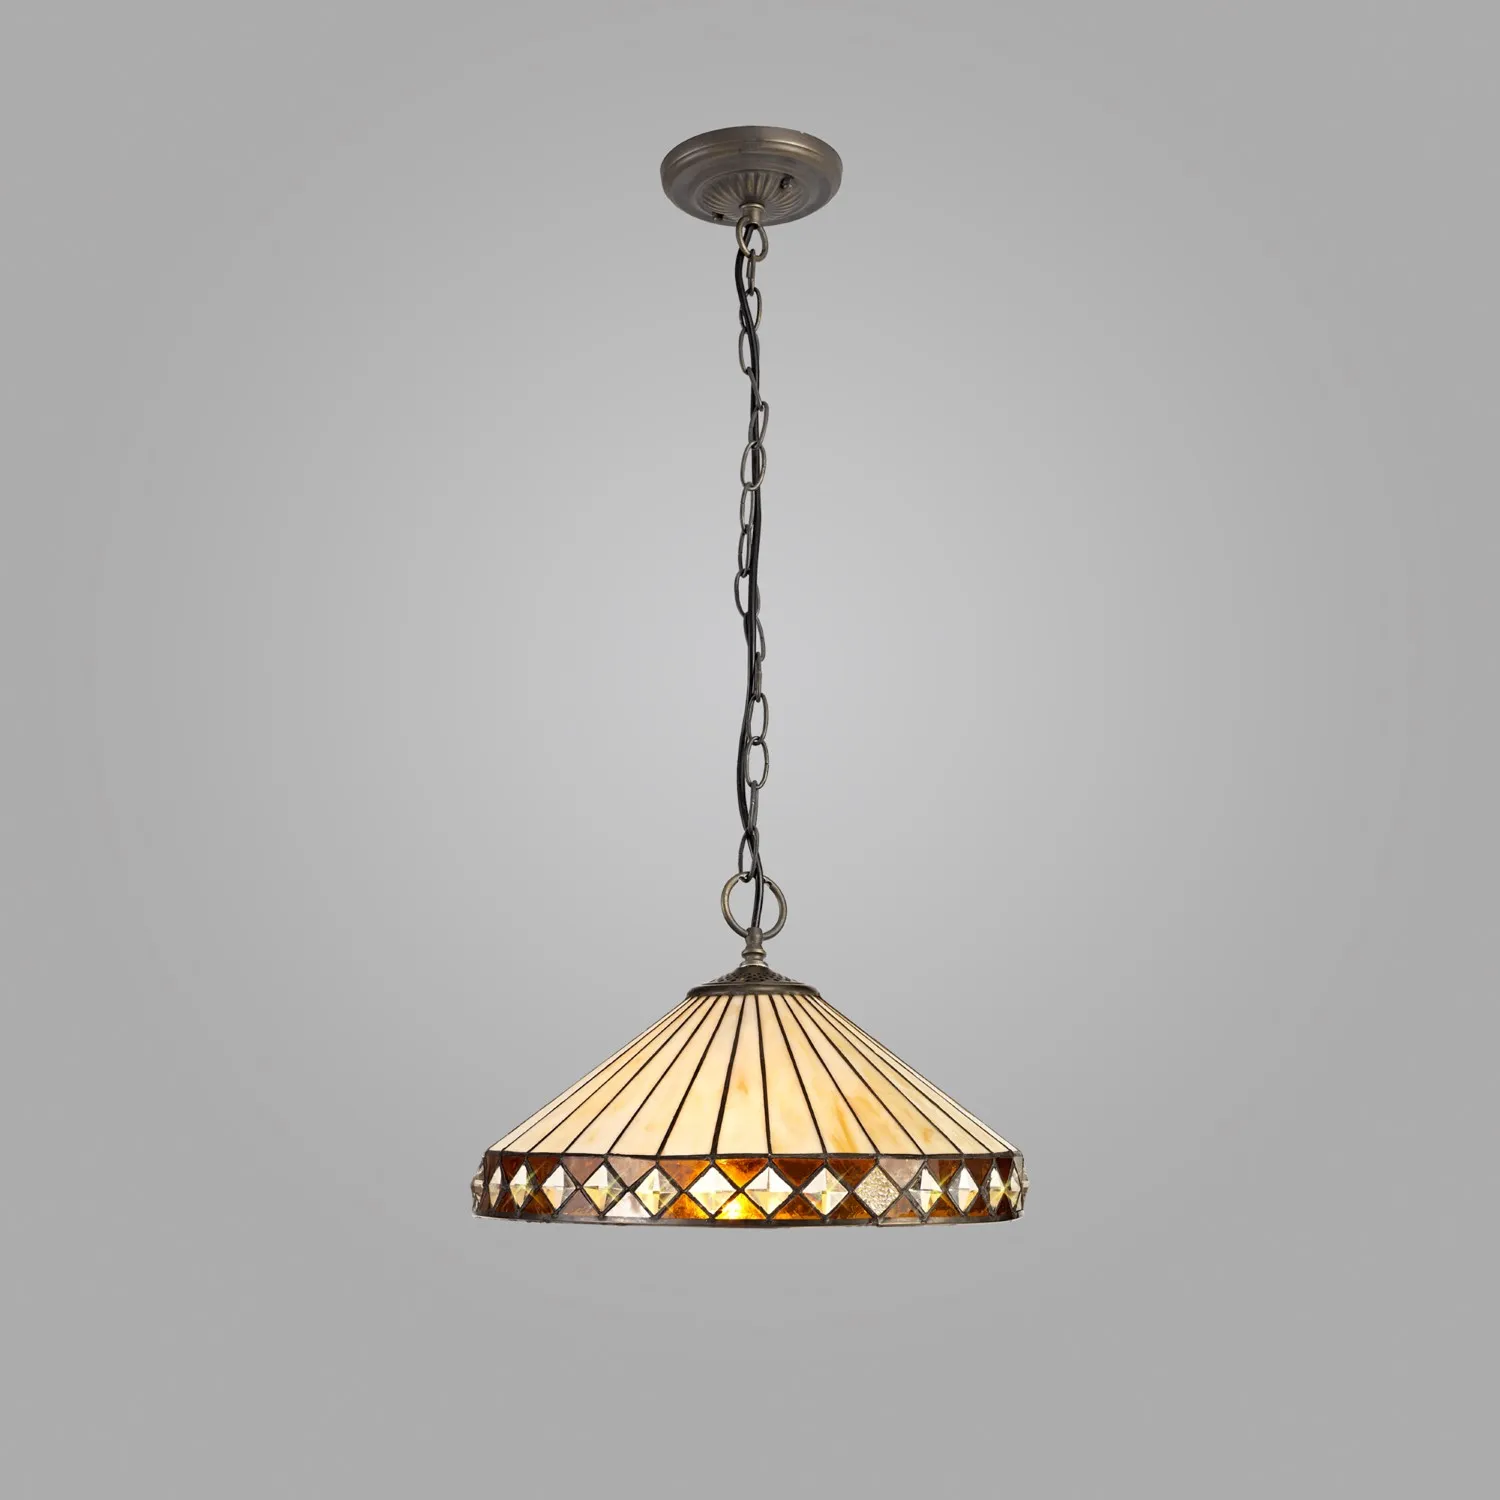 Rayleigh 3 Light Downlighter Pendant E27 With 40cm Tiffany Shade, Amber Cream Crystal Aged Antique Brass